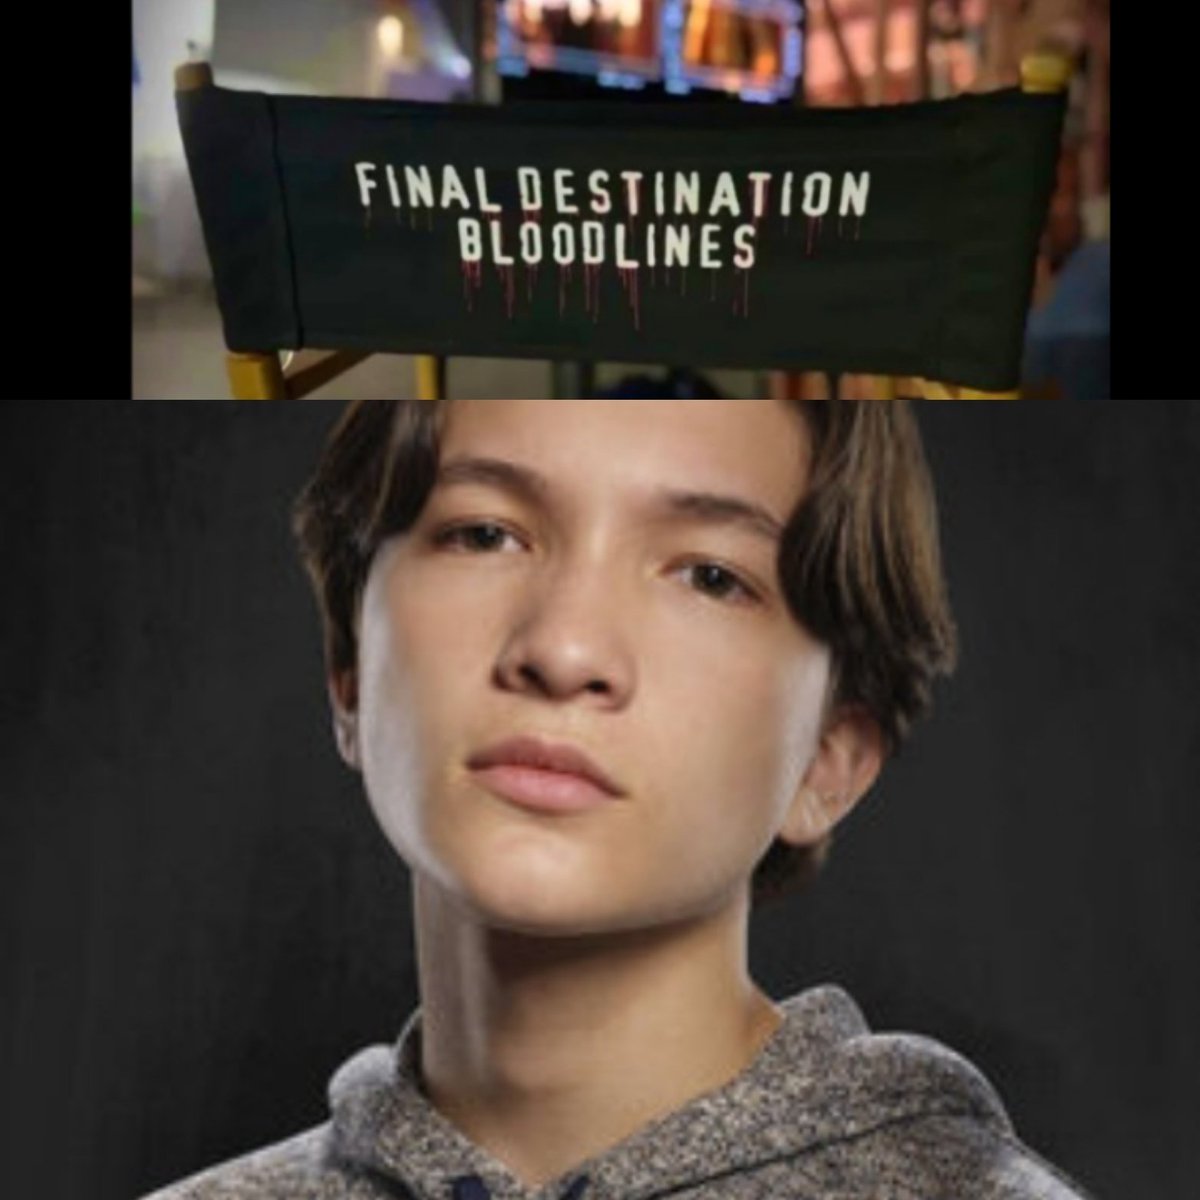 RUMOR: Teo Briones From Chucky Season 1 Might Have Been Casted I Final Destination 6 Bloodlines👀
#finaldestination #finaldestination6 #finaldestination6bloodlines #finaldestinationfranchise #sequel #death #2025 #finaldestinationbloodlines #chucky